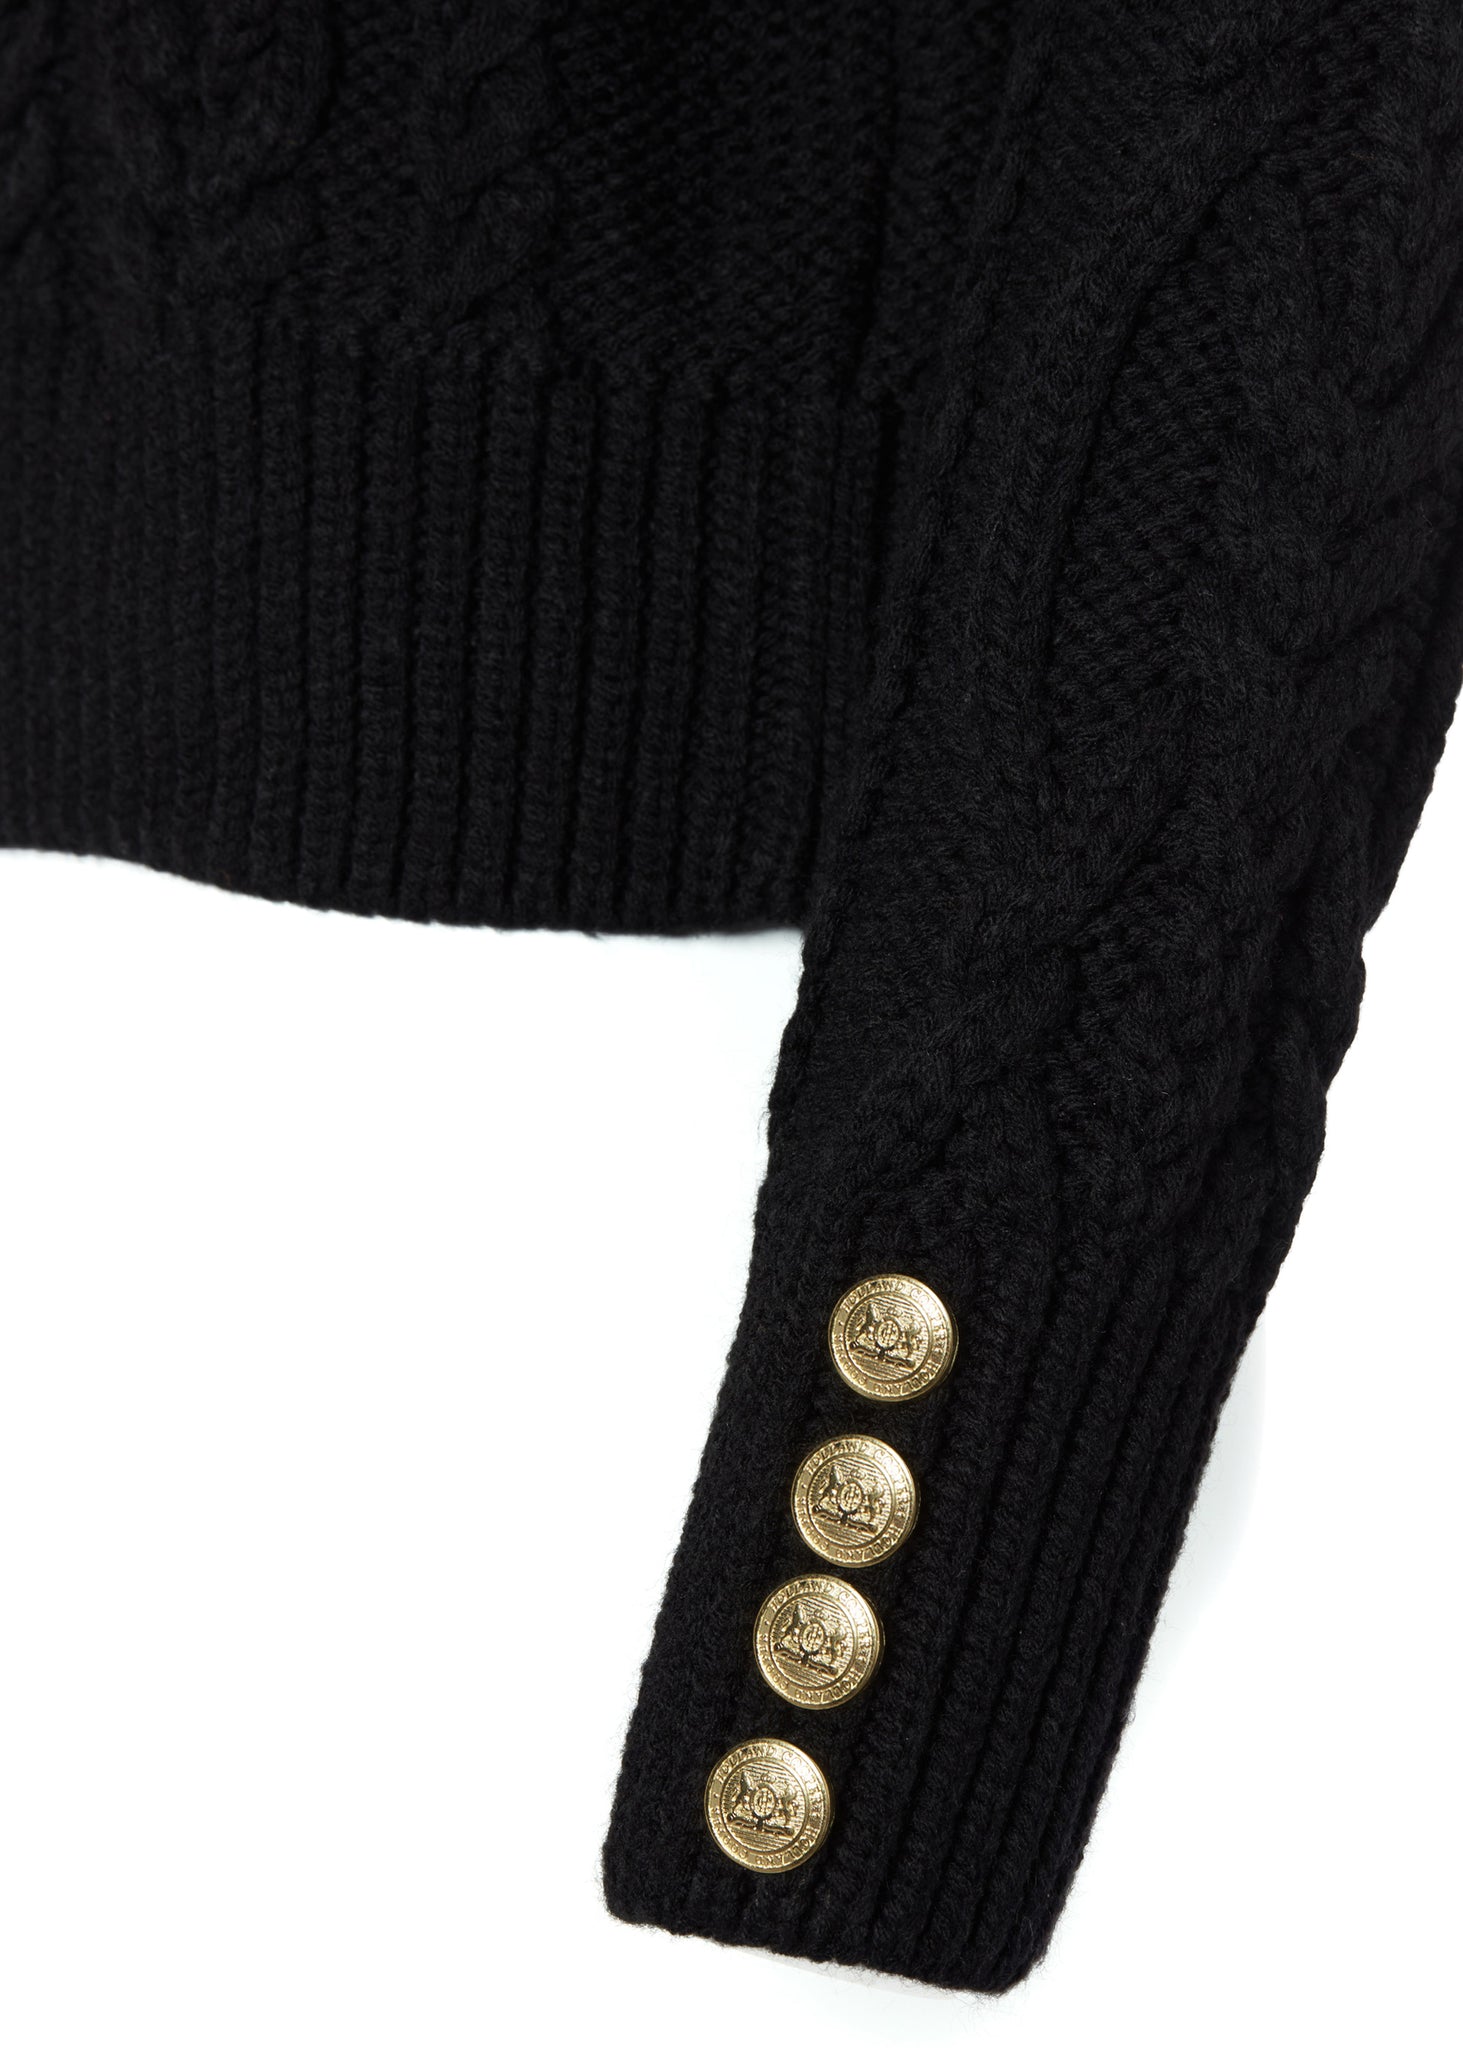 gold button detail on cuffs of a chunky cable knit roll neck jumper in black with dropped shoulders and thick ribbed cable trims and gold buttons on cuffs and collar